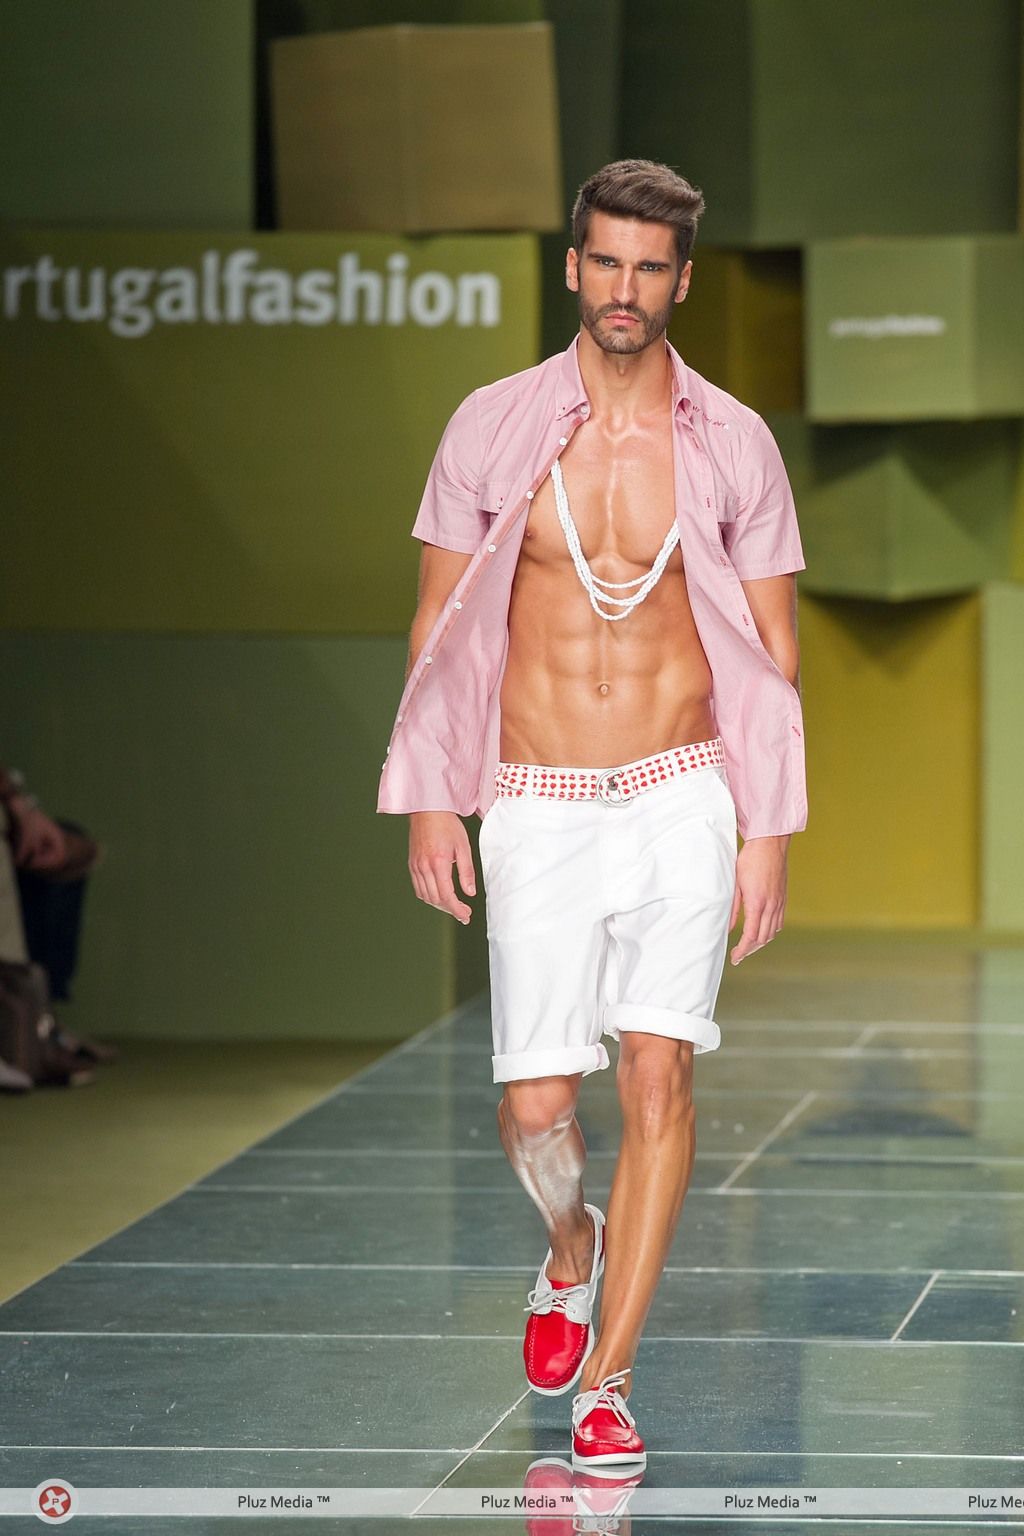 Portugal Fashion Week Spring/Summer 2012 - Vicri - Runway | Picture 109817